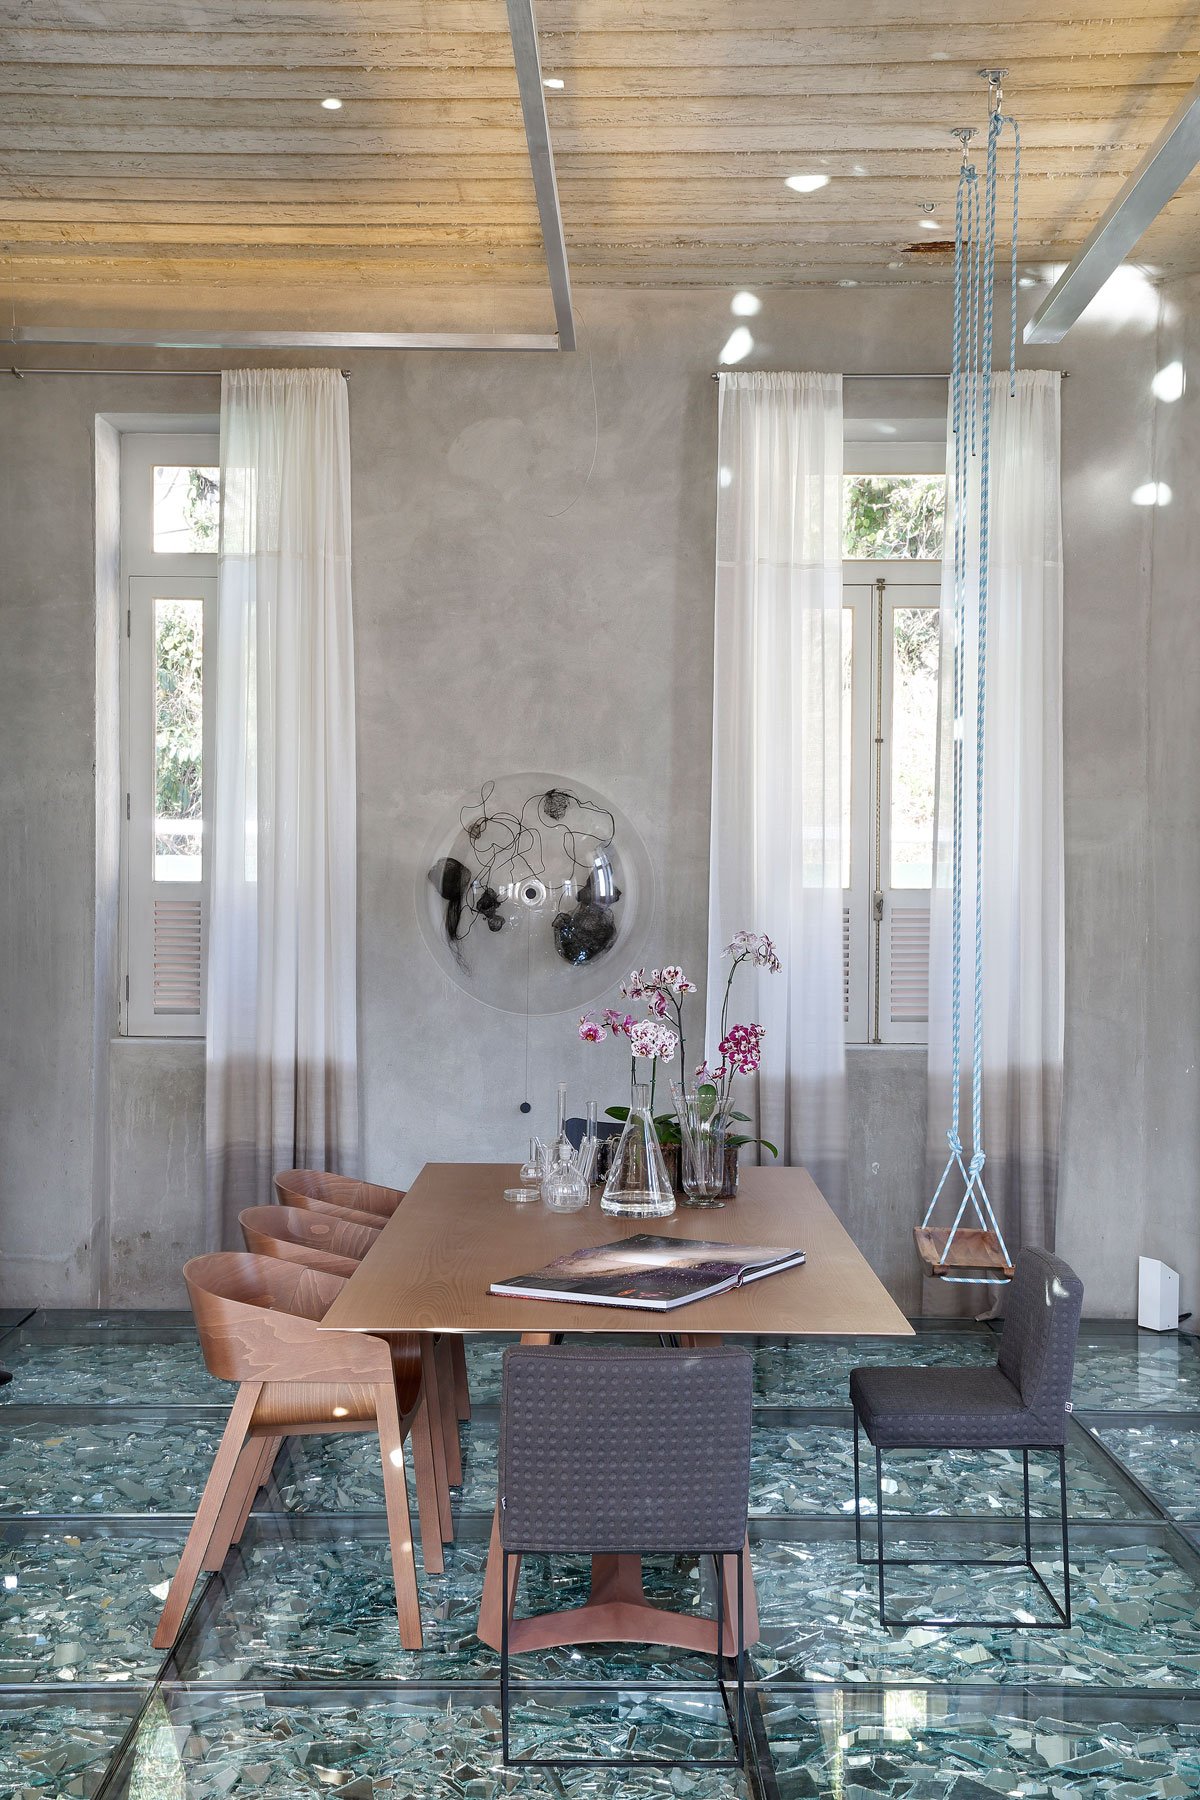 Stylish and Eclectic Design with Broken Glass Floor of Lab LZ for Casa Cor Rio 2015 by Giselle Taranto Architecture-25